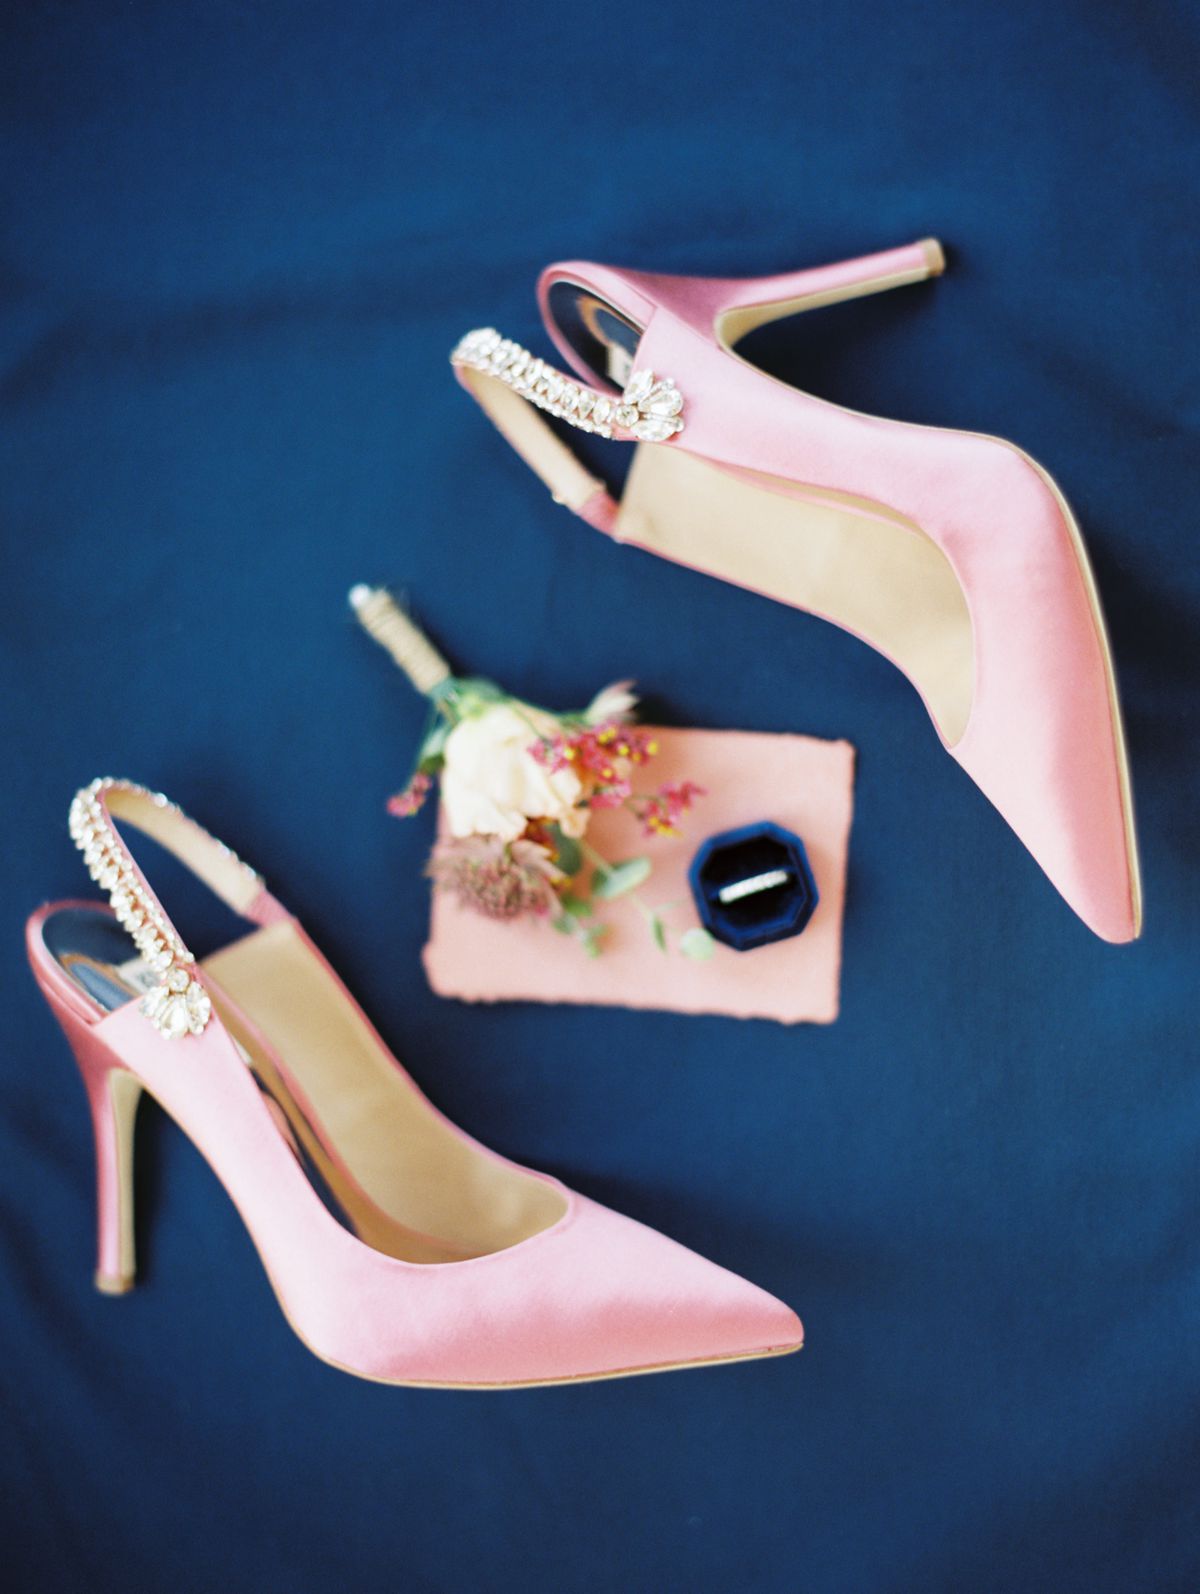 details of wedding shoes onflat lay at corfu wedding